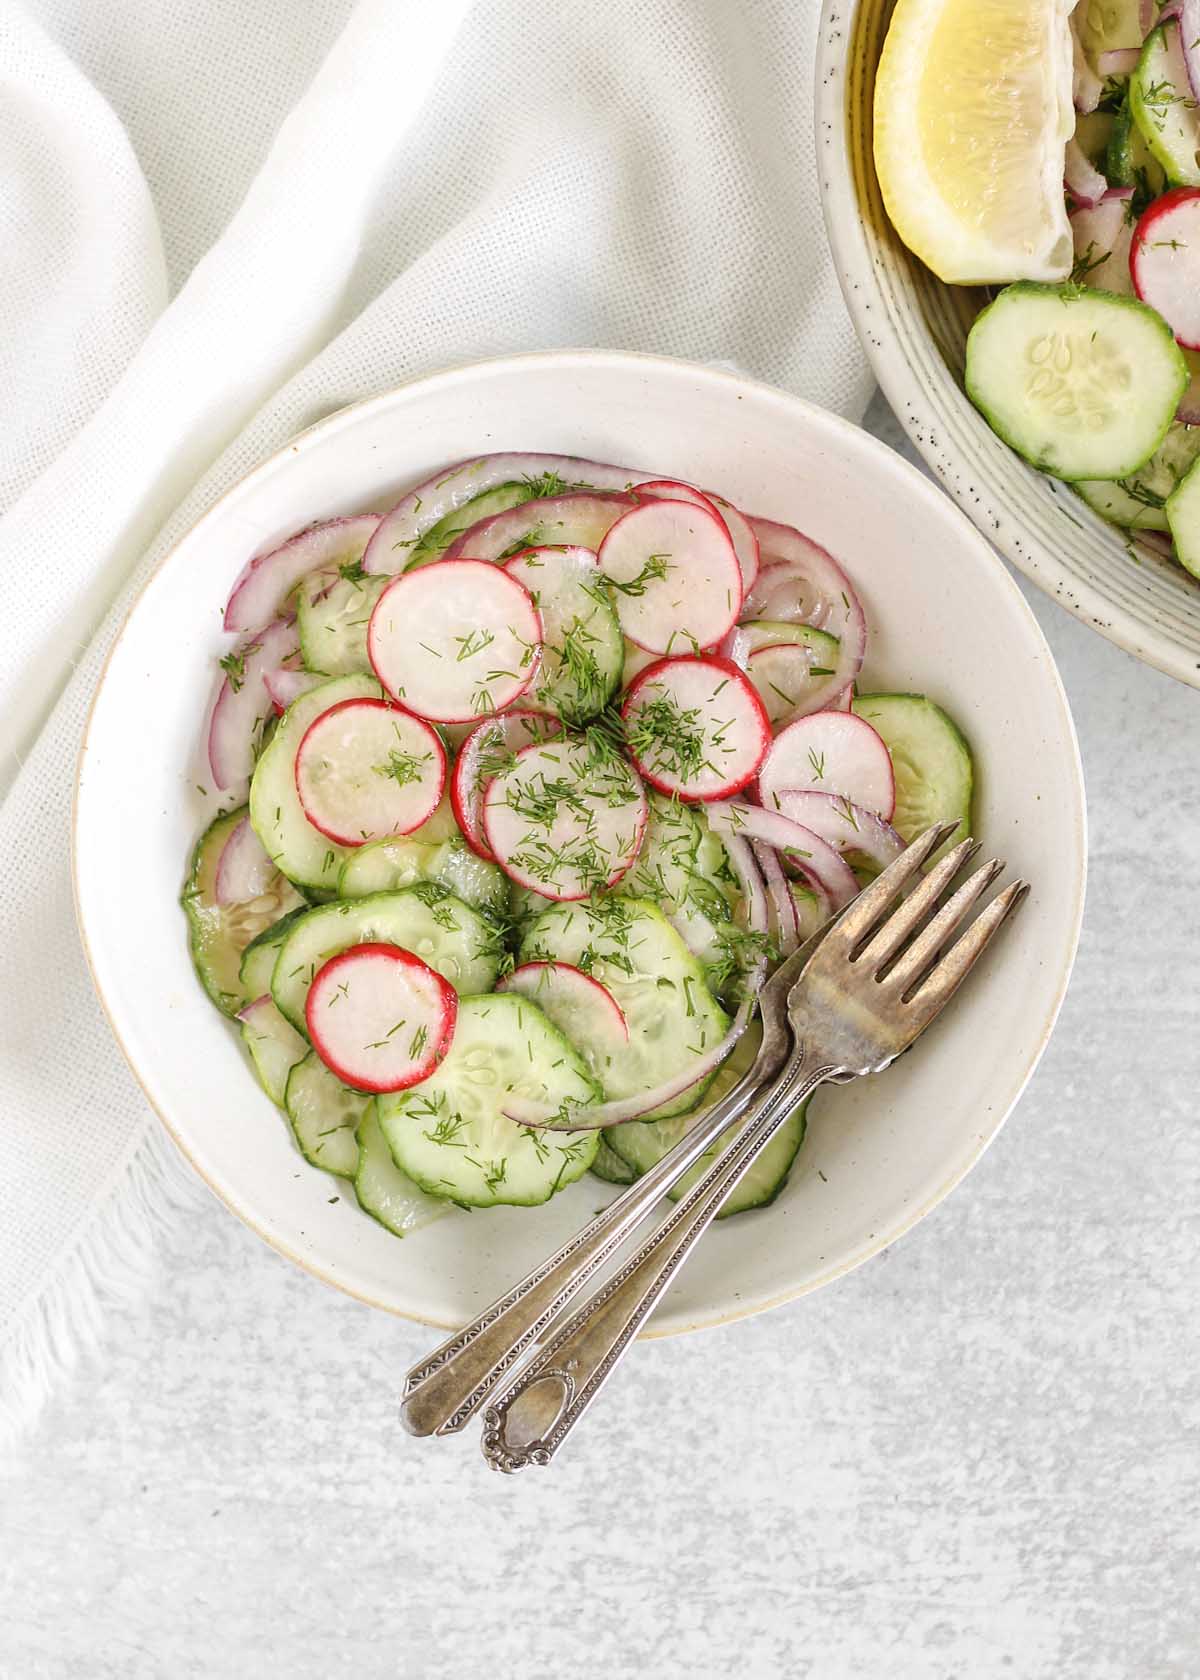 Cucumber radish salad on a small plate with two vintage forks and a bowl of the salad off to the side.